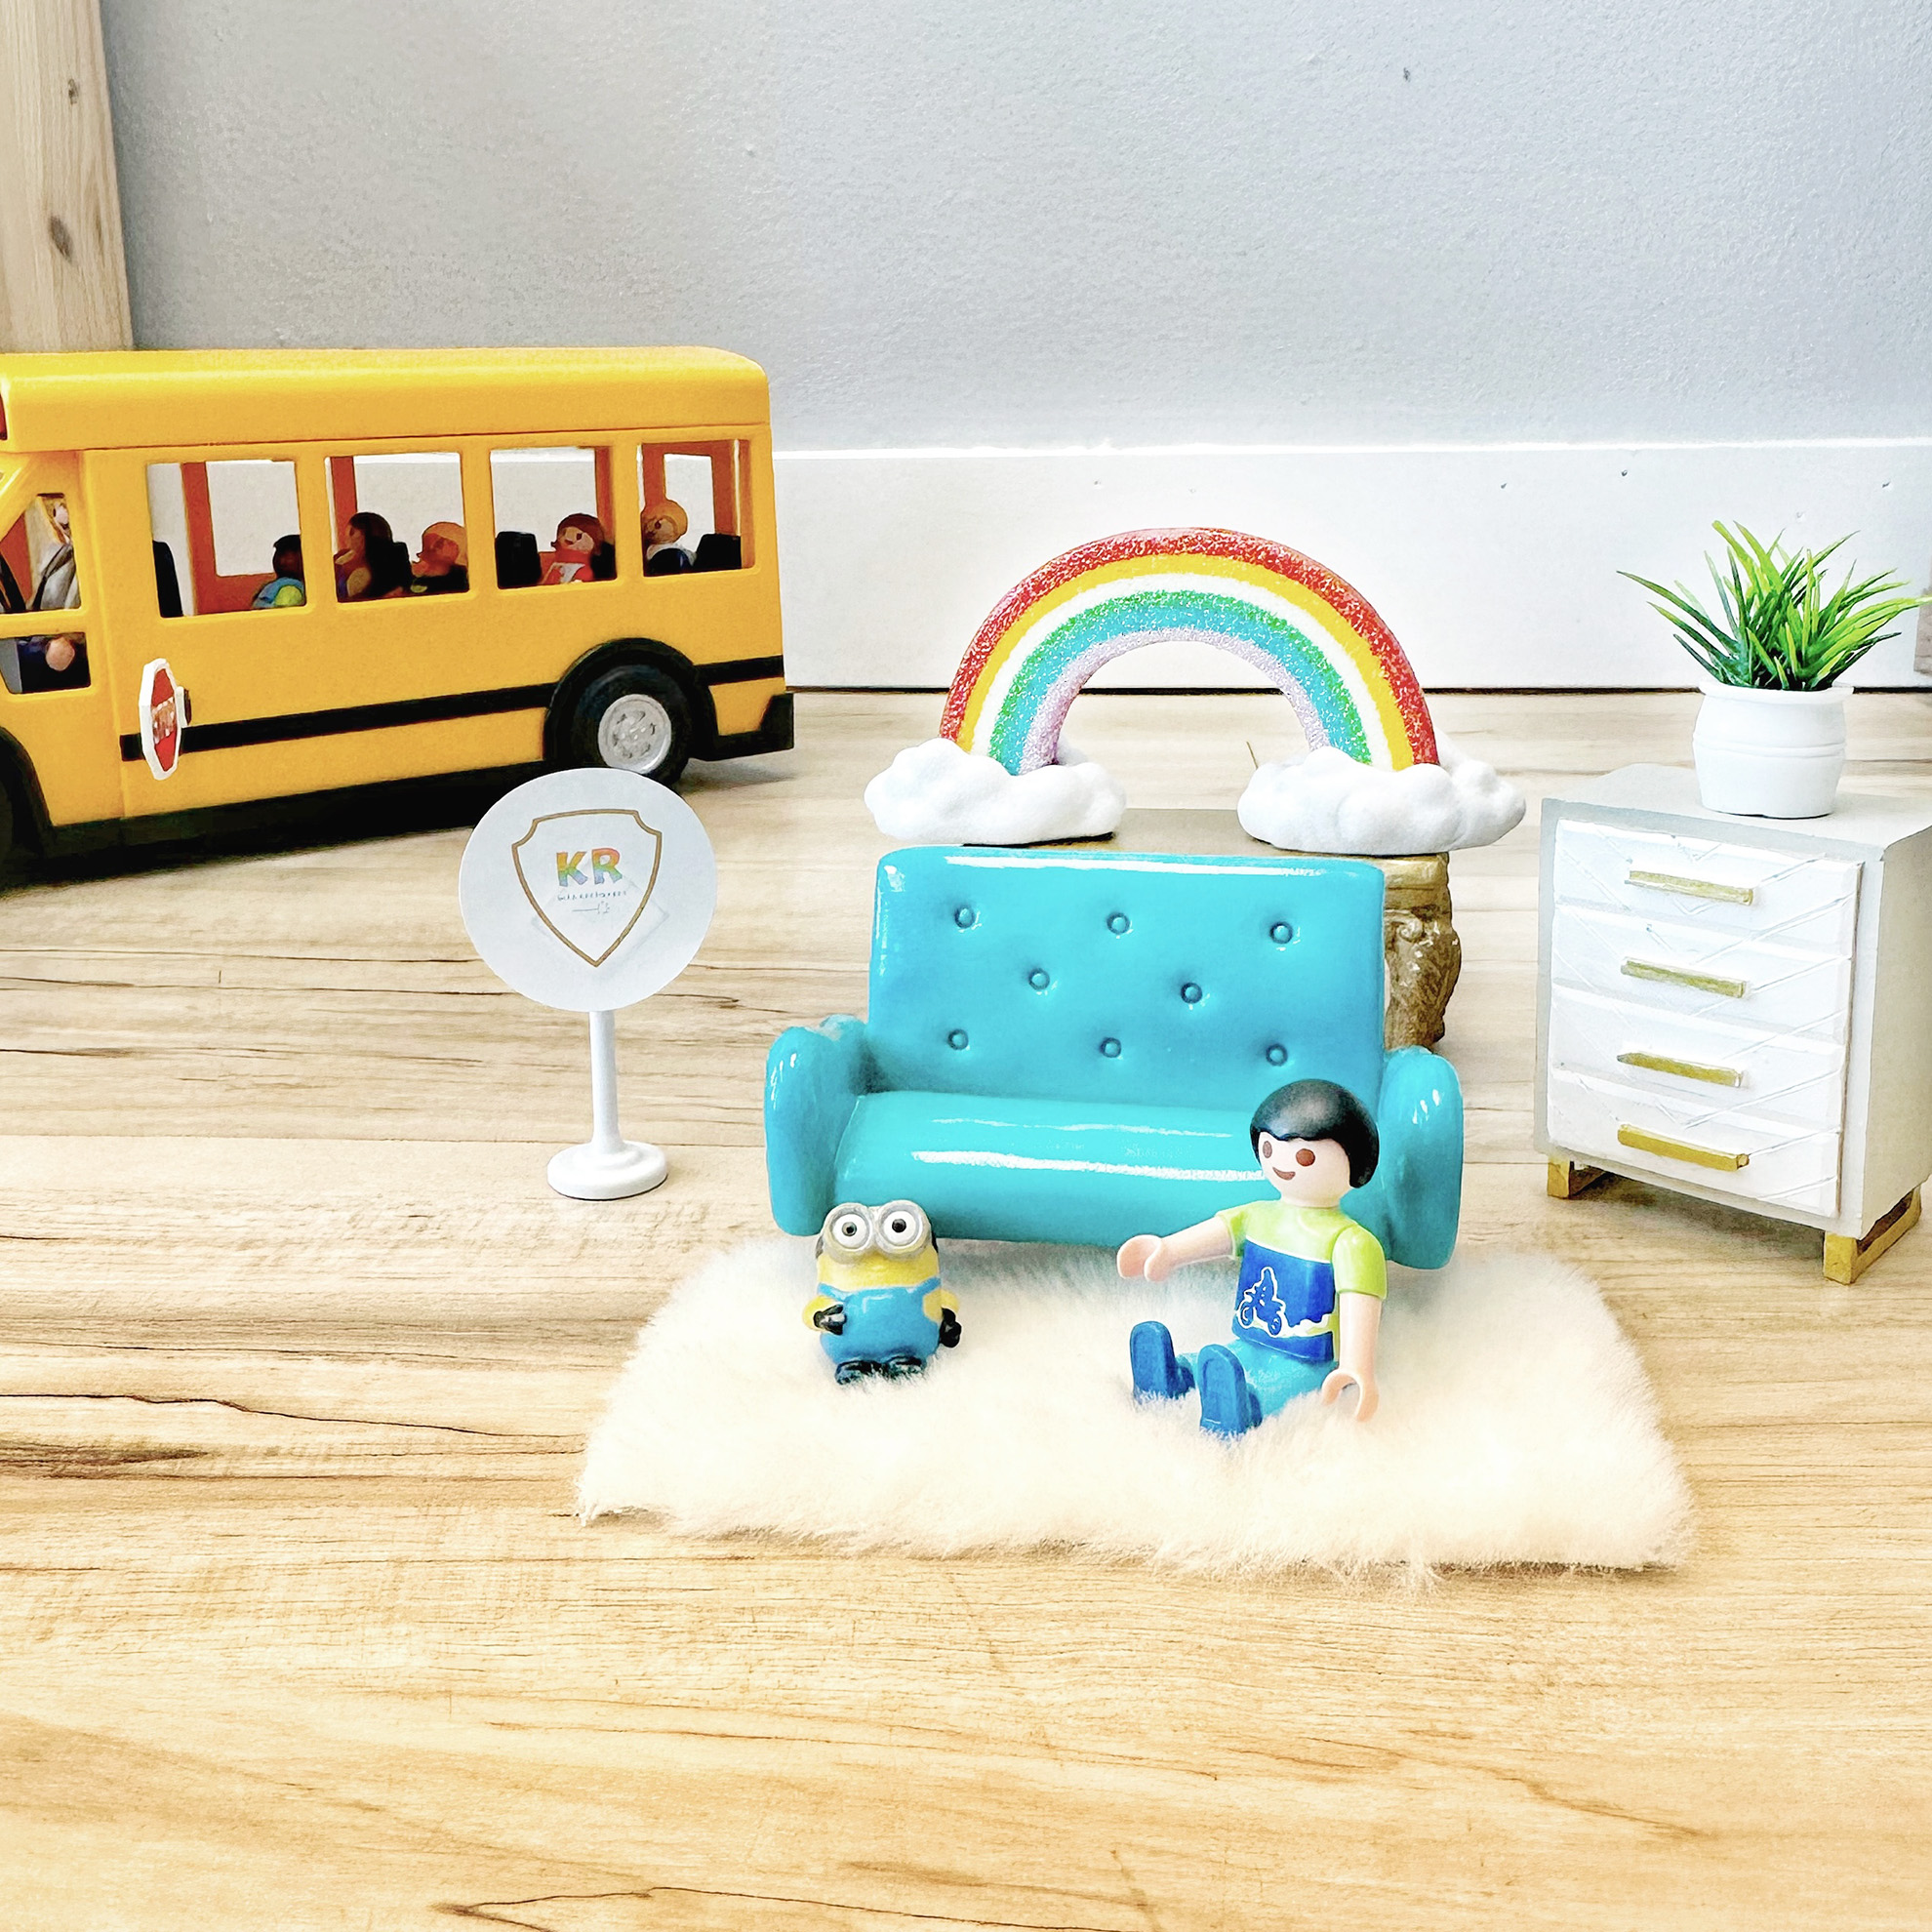 Toys arranged to depict a child in a Kids Reconnect play therapy room, with a toy school bus in the background.